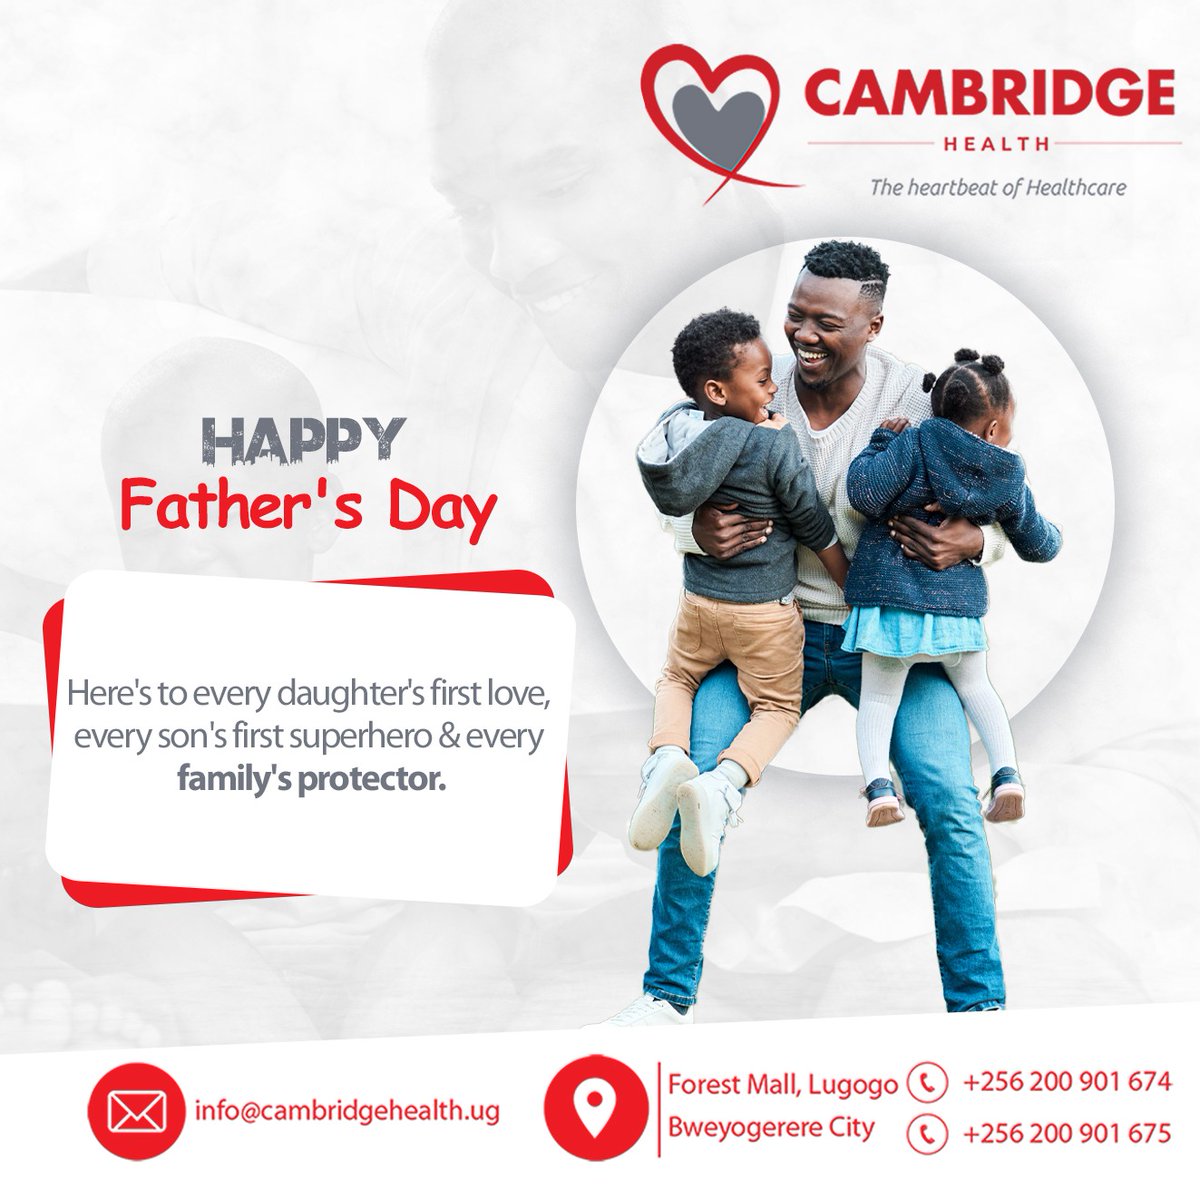 A heartfelt Father's Day to all the amazing fathers out there.

Your presence is invaluable.

#HappyFathersDayWeekend #weekendmood  #CambridgeHealth